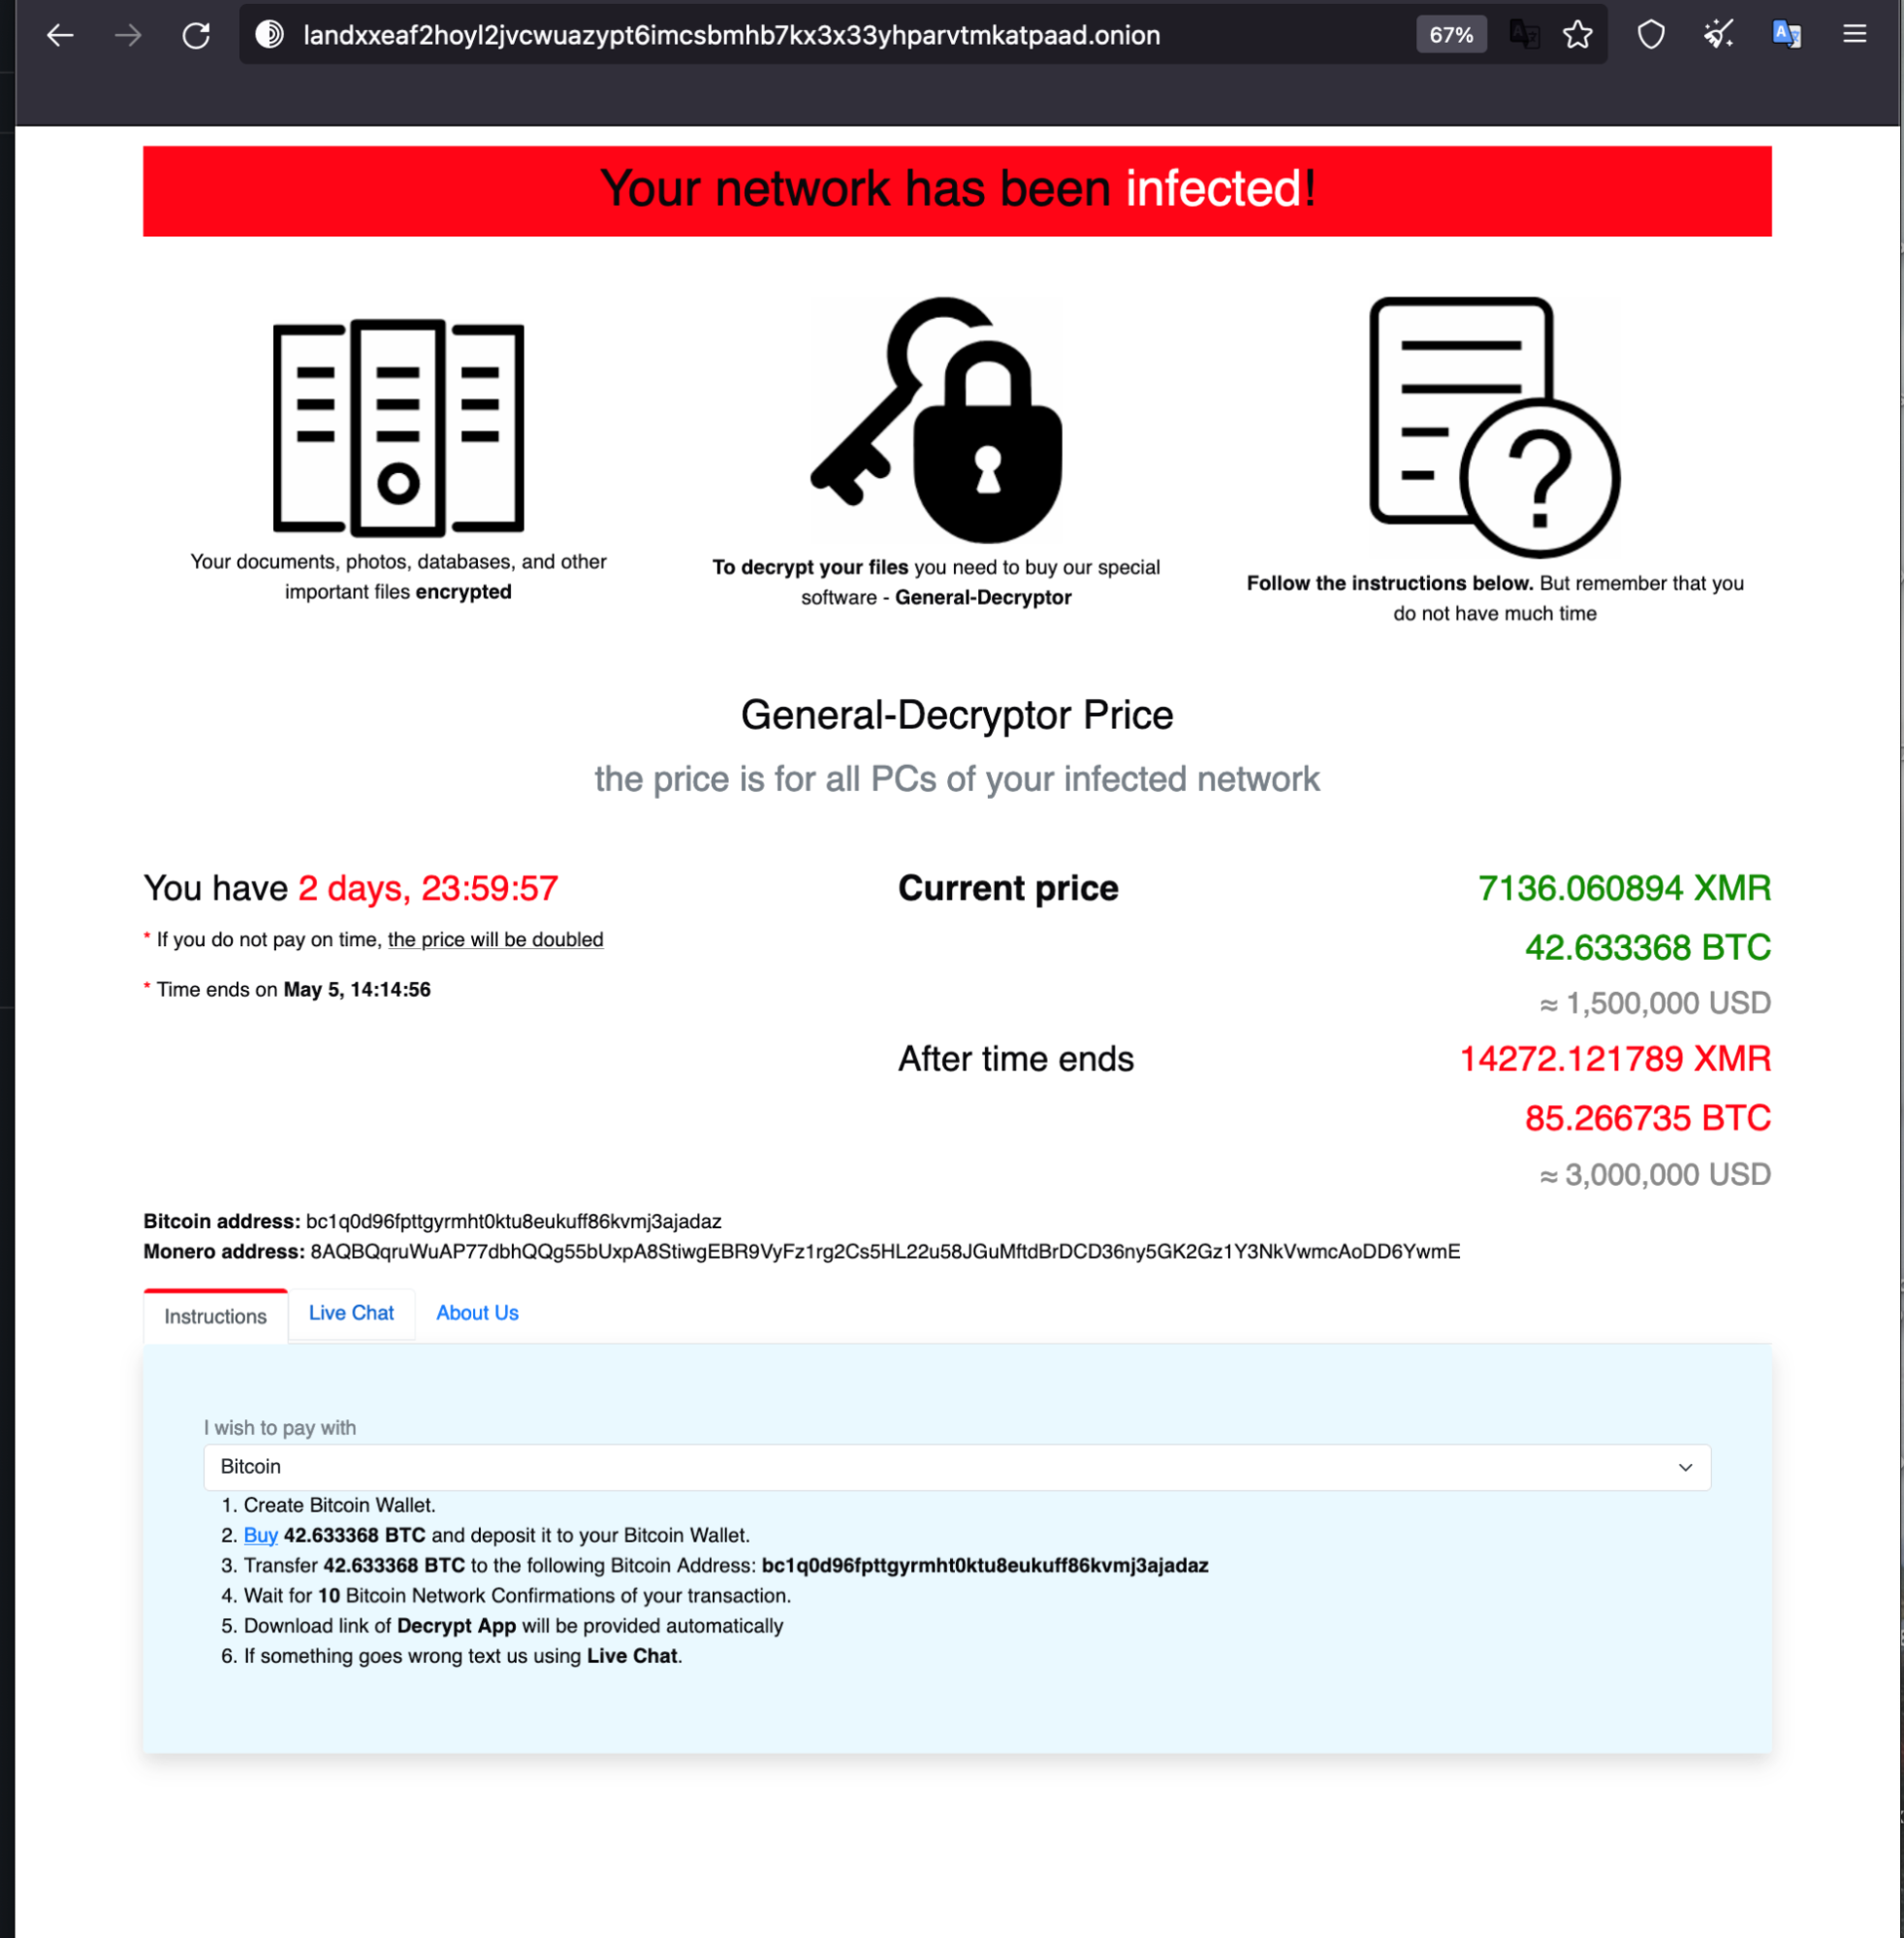 Screenshot of REvil payment site. It begins with a banner that says, "Your network has been infested," then includes deadline and price information as well as information about a Bitcoin wallet. 